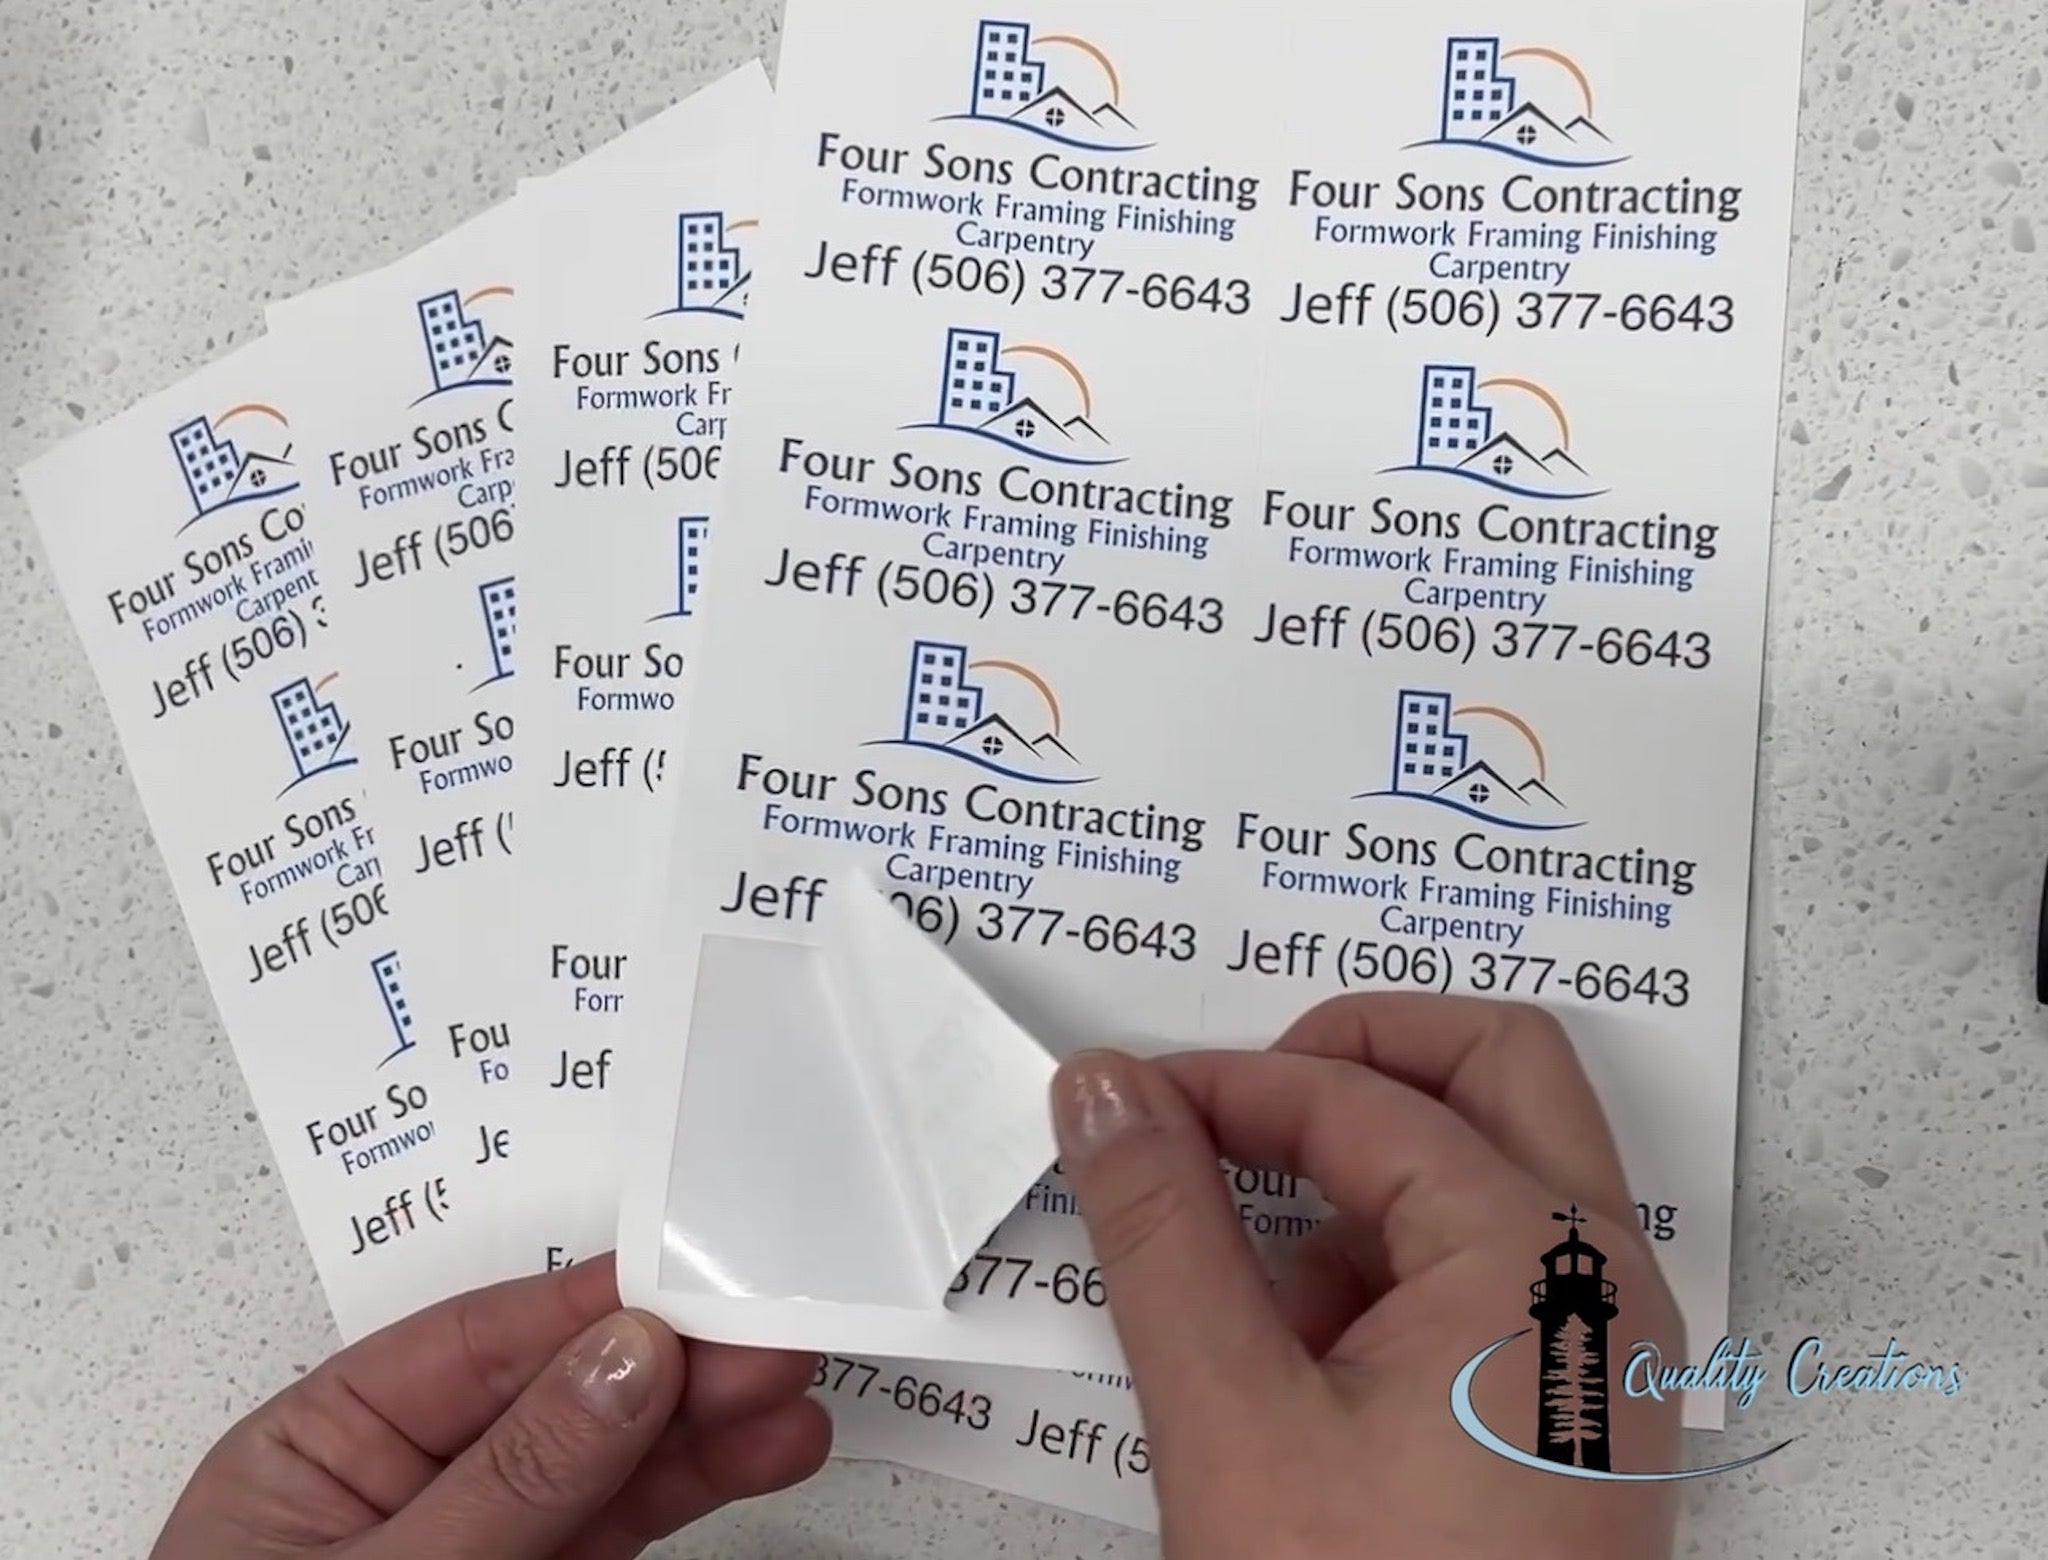 four sons contracting sticker sheet quality creations moncton small business salisbury newbrunswick